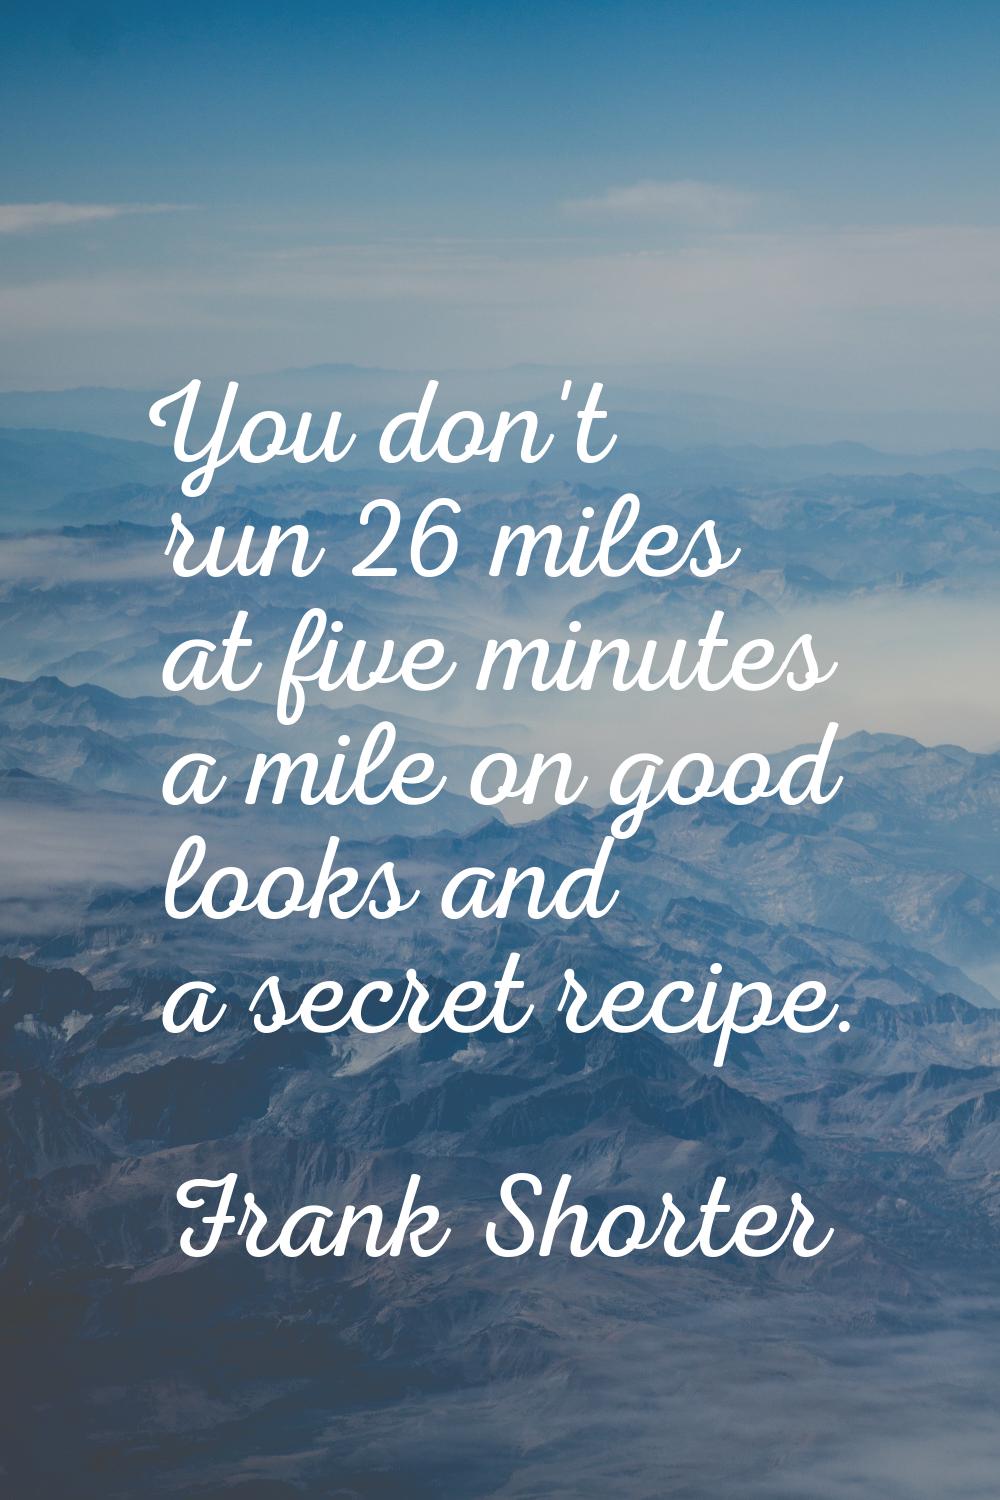 You don't run 26 miles at five minutes a mile on good looks and a secret recipe.